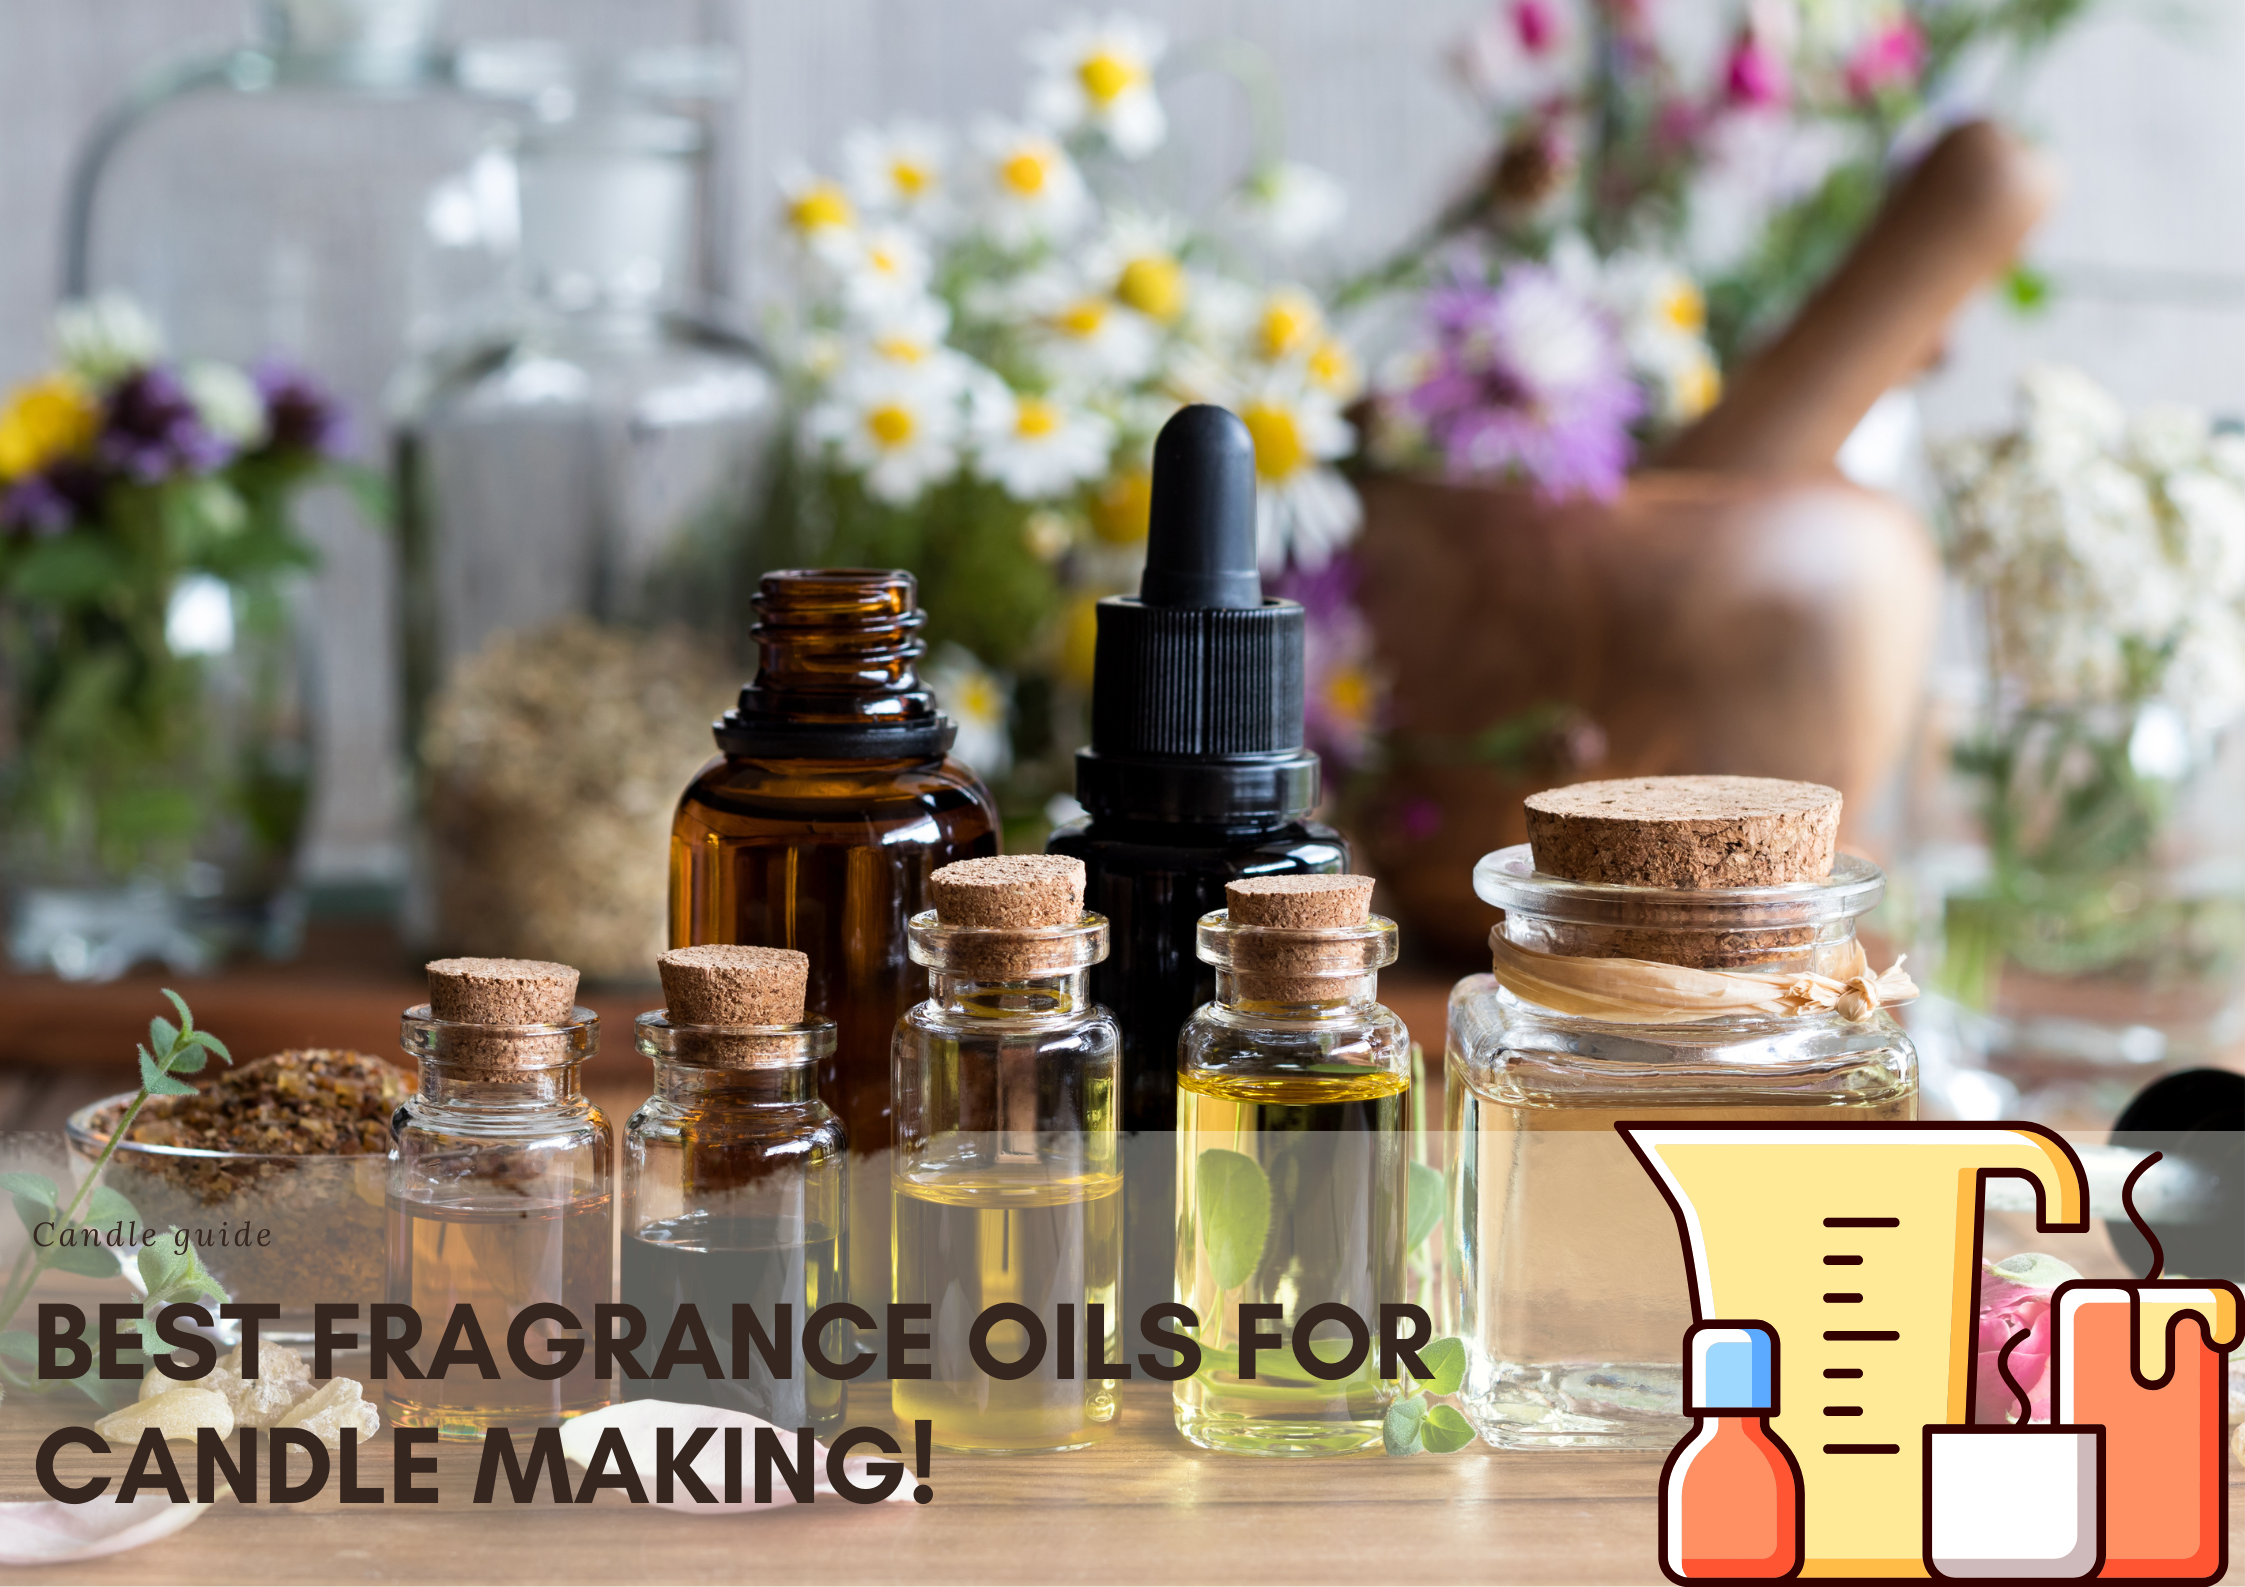 Best fragrance Oils for Candle Making! (Our Top 5 Scents